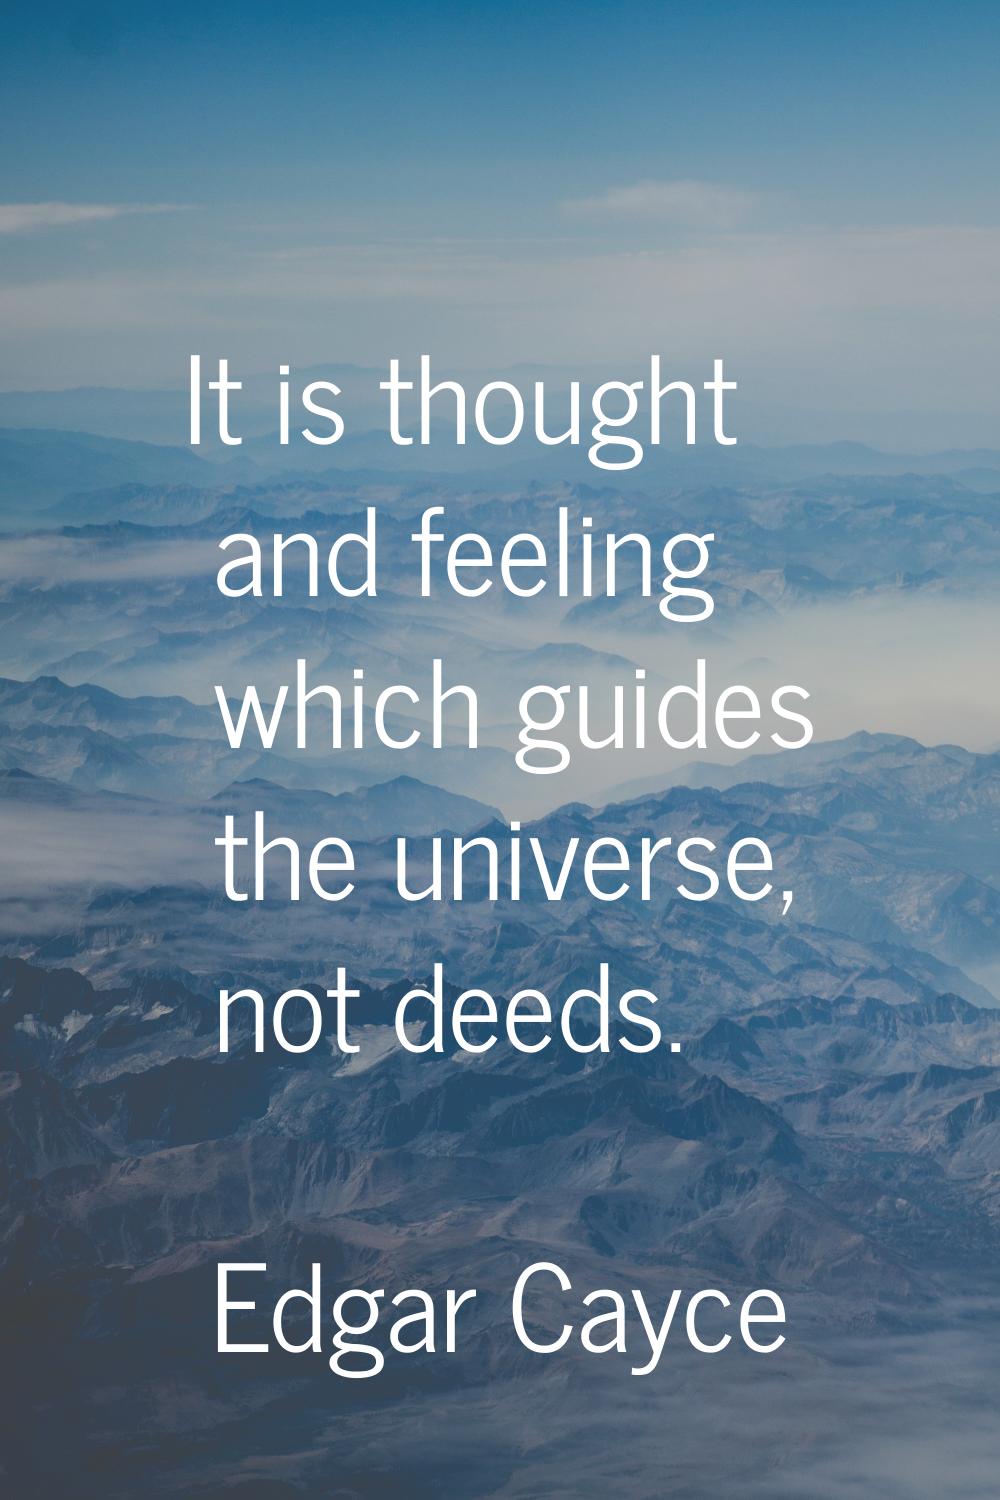 It is thought and feeling which guides the universe, not deeds.